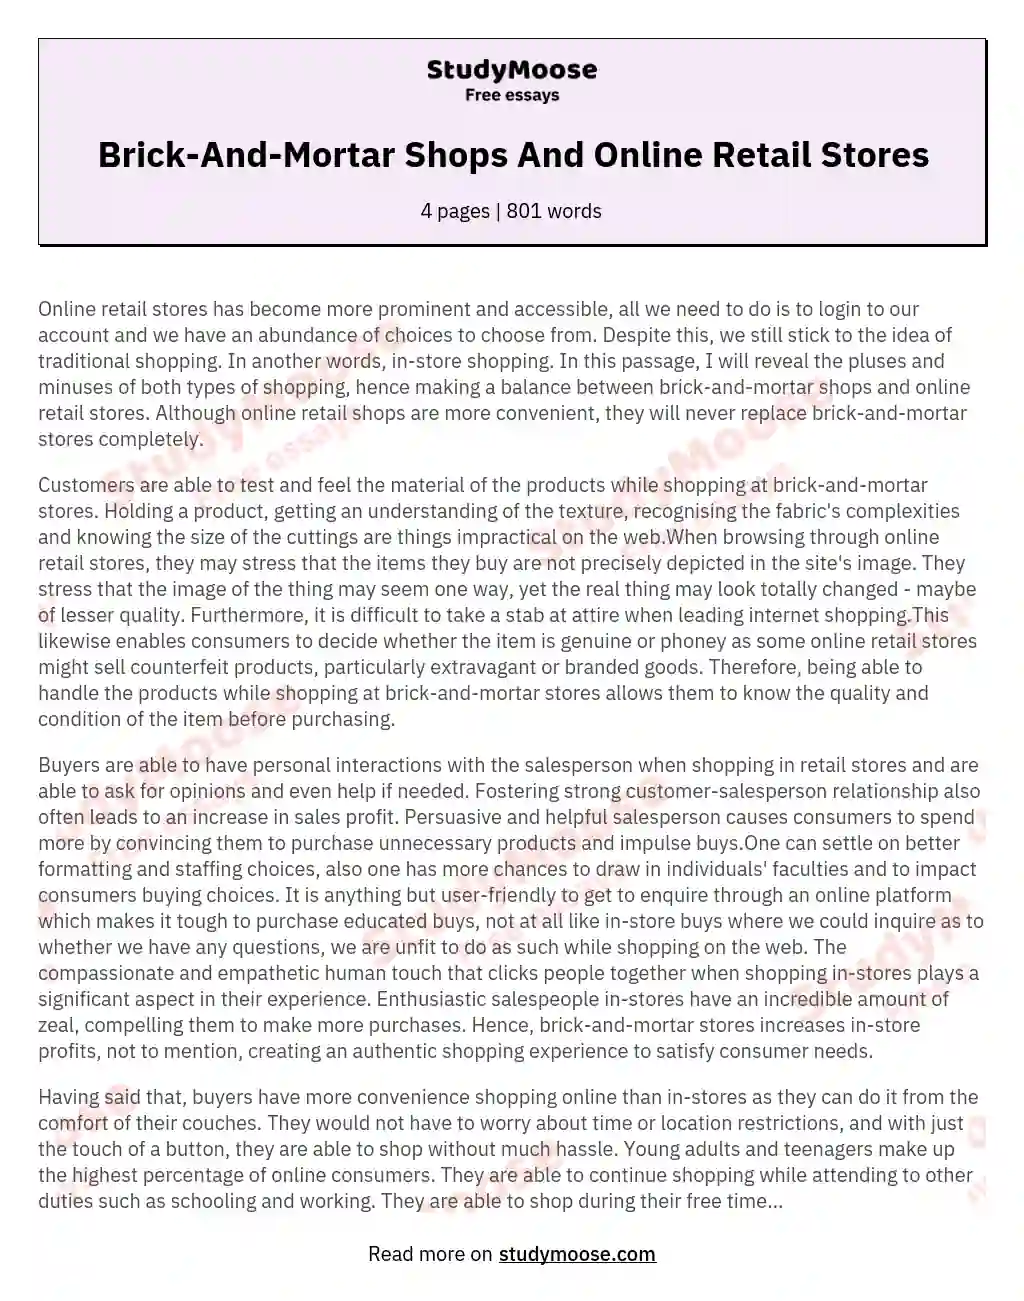 Brick-And-Mortar Shops And Online Retail Stores